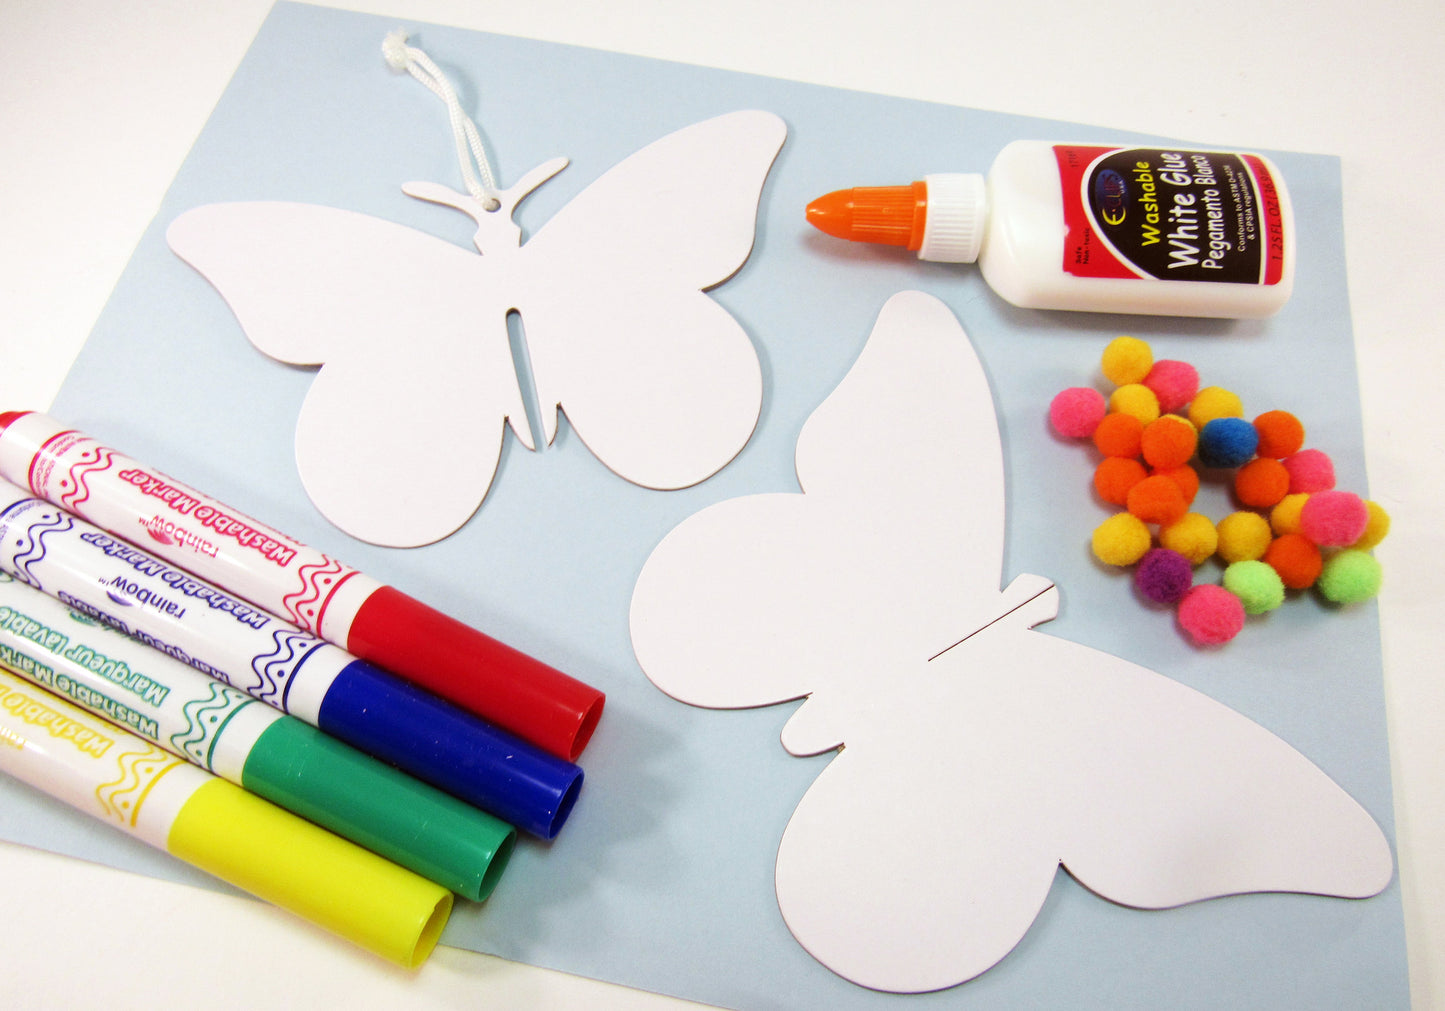 3-dimensional butterfly art project - Ivy Kids Educational Activity Kit featuring the book Gotta Go! Gotta Go! by Sam Swope and over 10 art, literacy, math, and science activities inspired by the story. Learn about monarch butterflies. Perfect kit for spring.